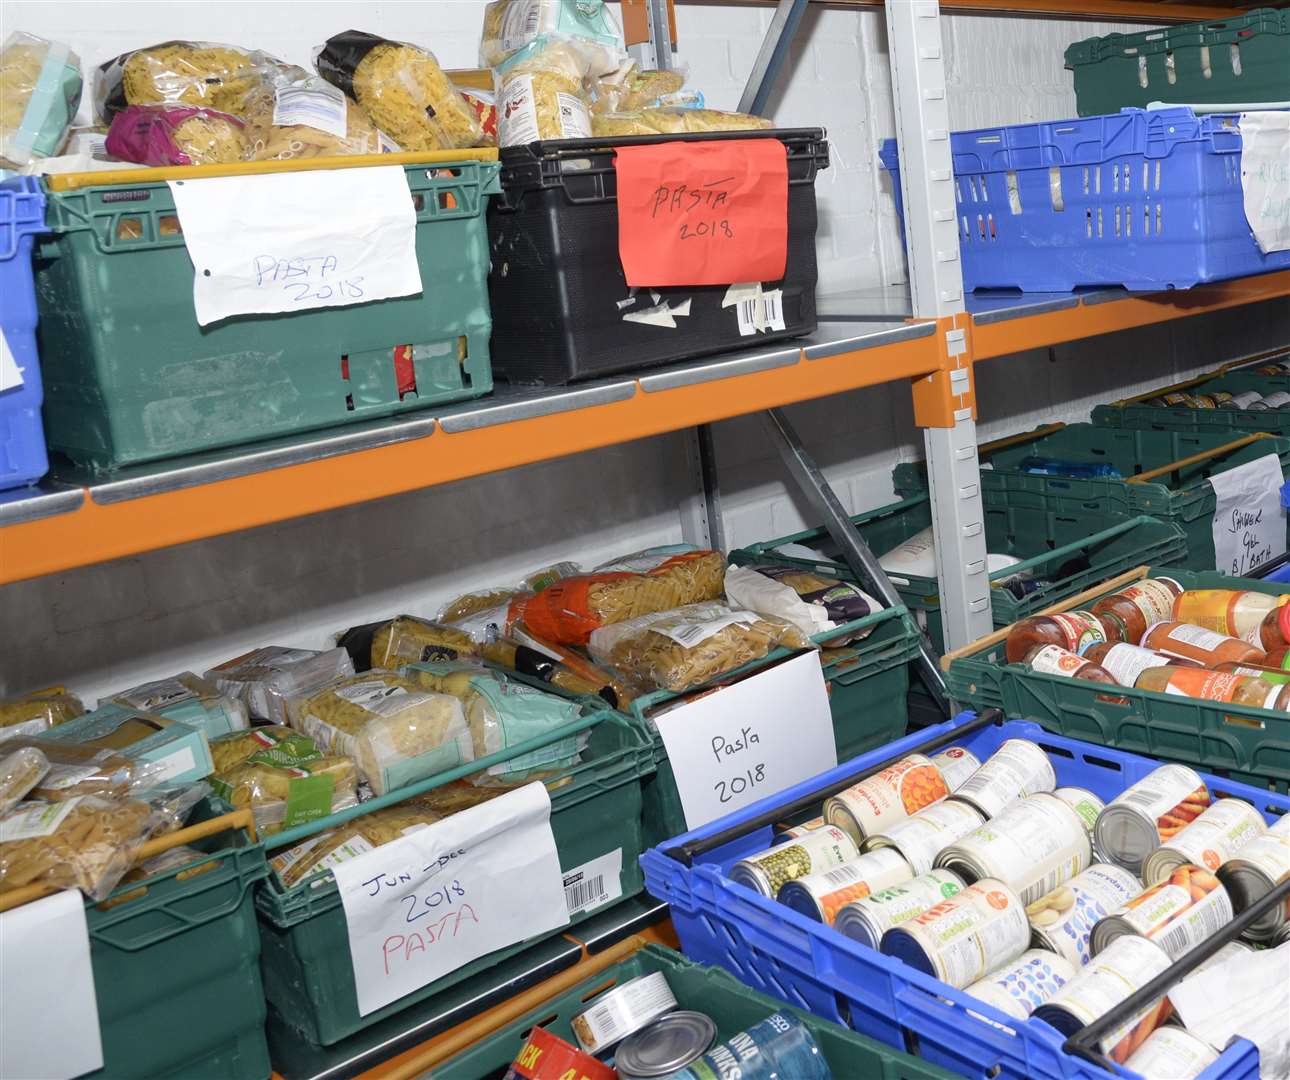 The number of people using Trussell Turst foodbanks in Kent has risen